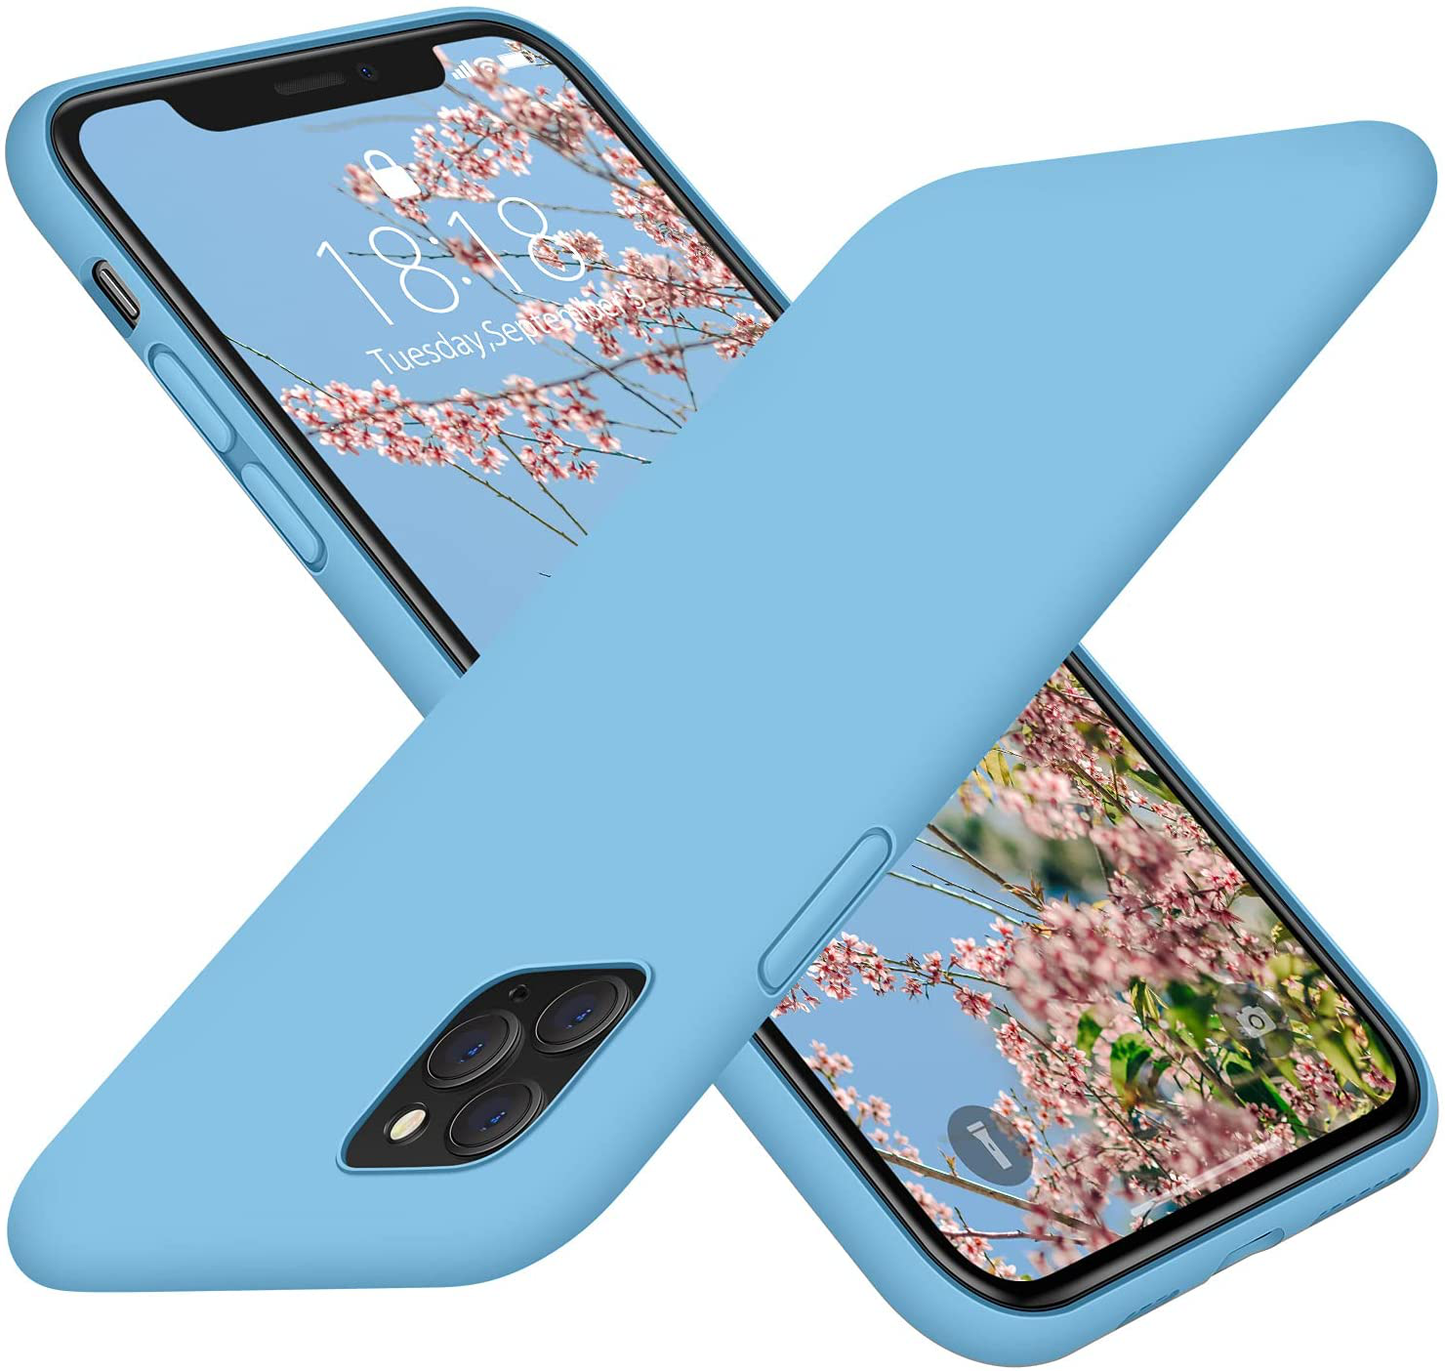 Full Covered Silicone Cover with Honeycomb Grid Cushion Compatible for iPhone 11 Pro 5.8"